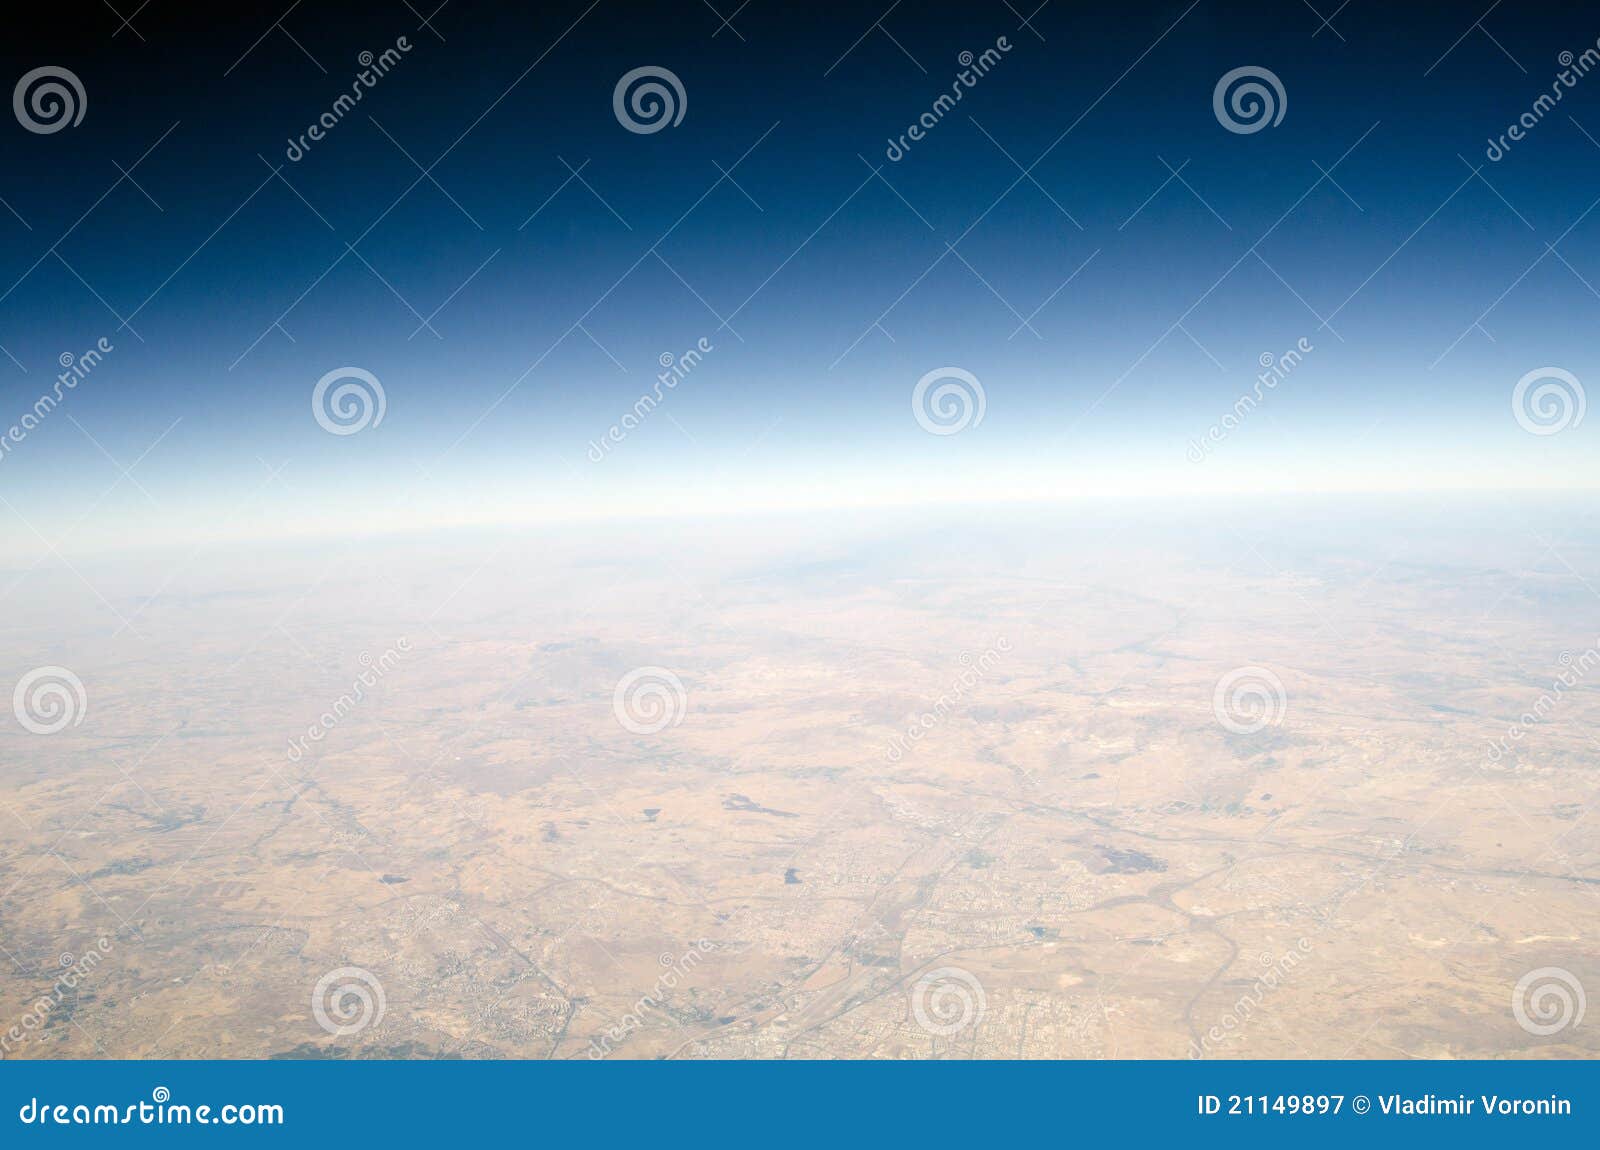 high altitude view of the earth